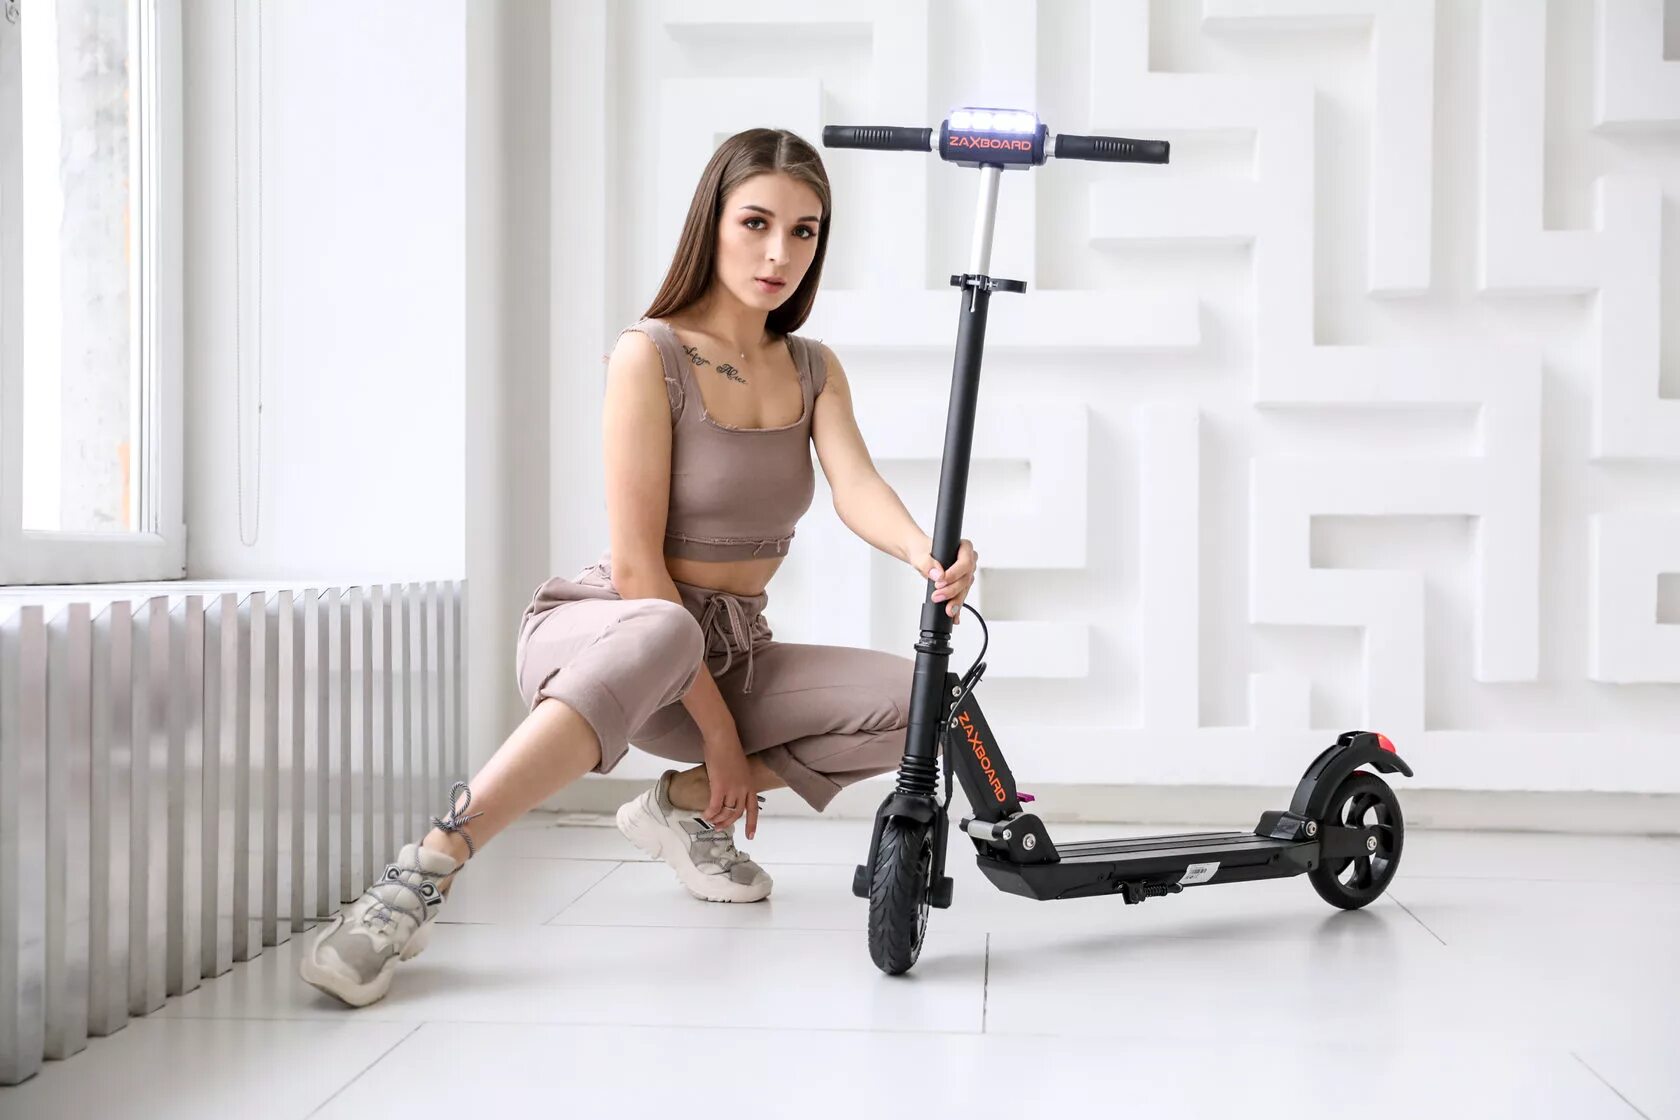 Acer scooter series 3. Электросамокат Zaxboard es-8i. Электросамокат Zaxboard es-10 Max. Электросамокат Kugoo s3 с девушкой. Самокат Zaxboard 8i.